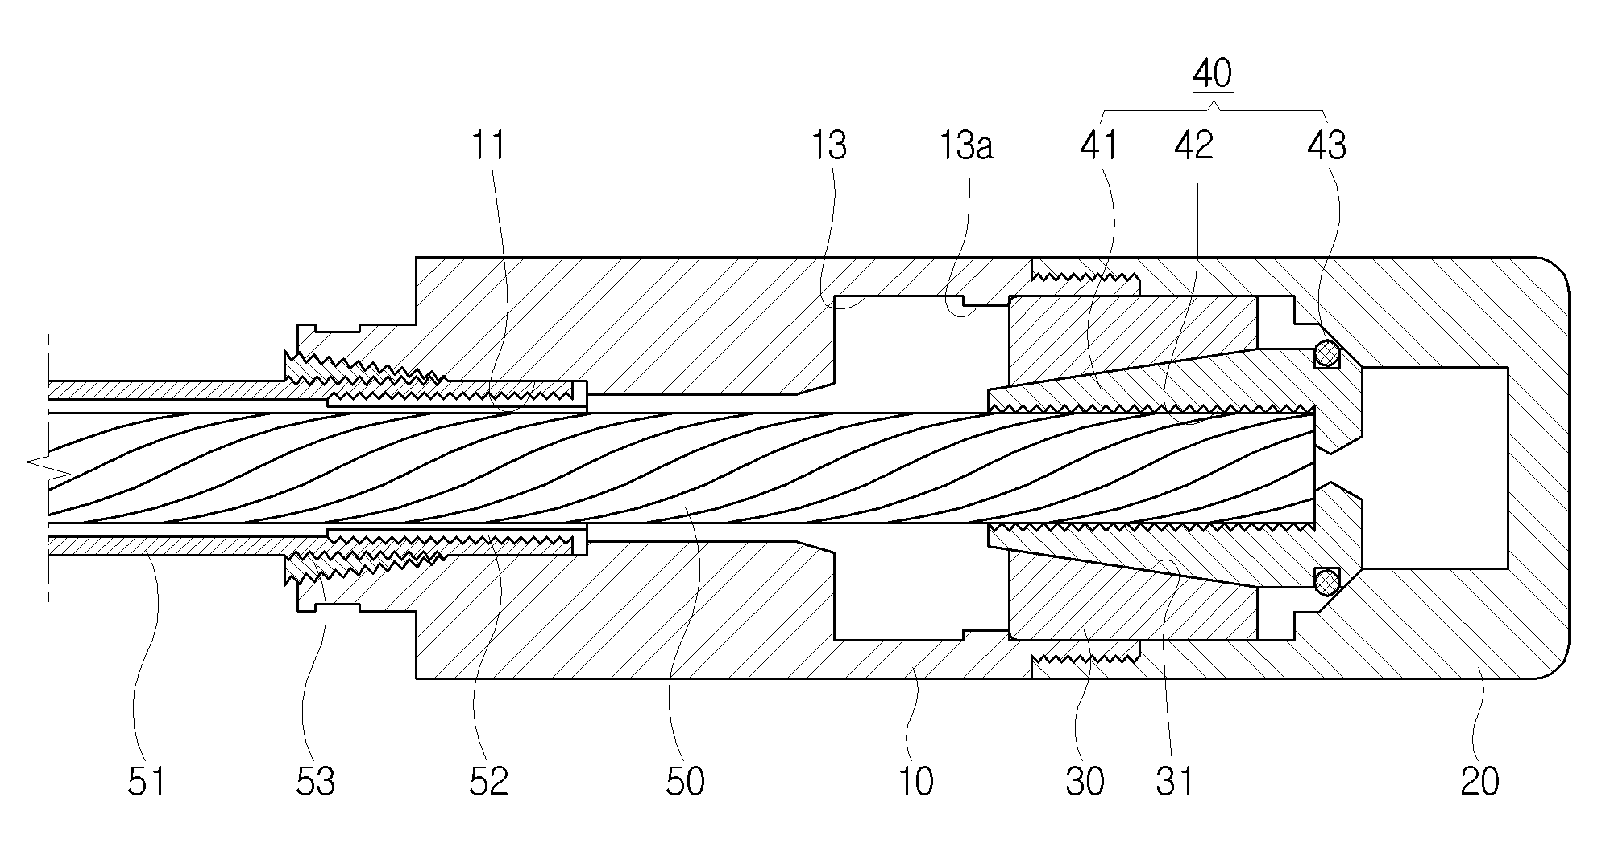 Internal Fixer For Anchor Having Releasable Tensioning Steel Wire